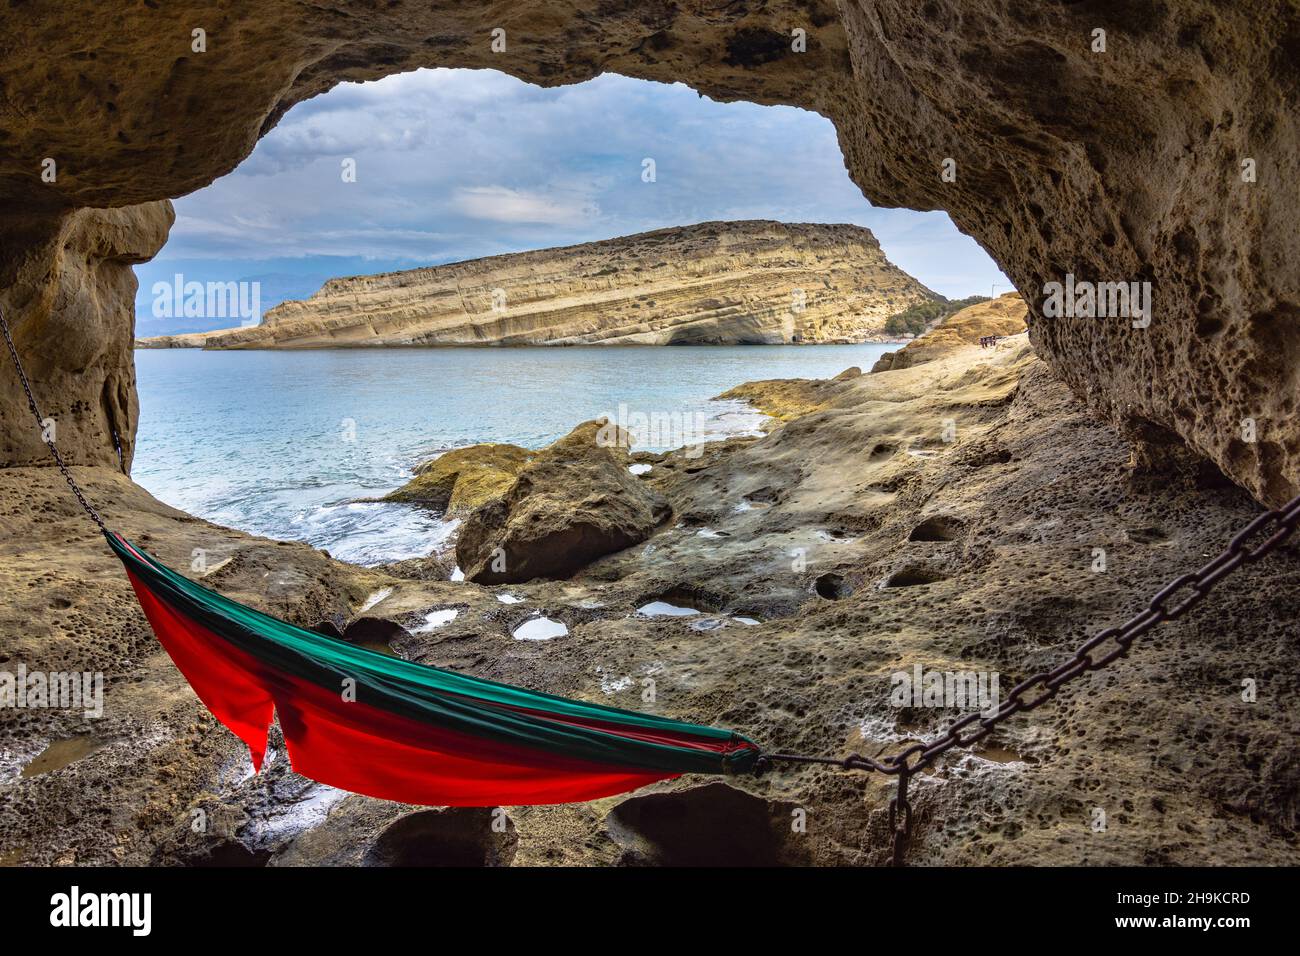 Matala beach with caves on the rocks that were used as a roman cemetery and at the decade of 70's were living hippies from all over the world, Crete, Stock Photo